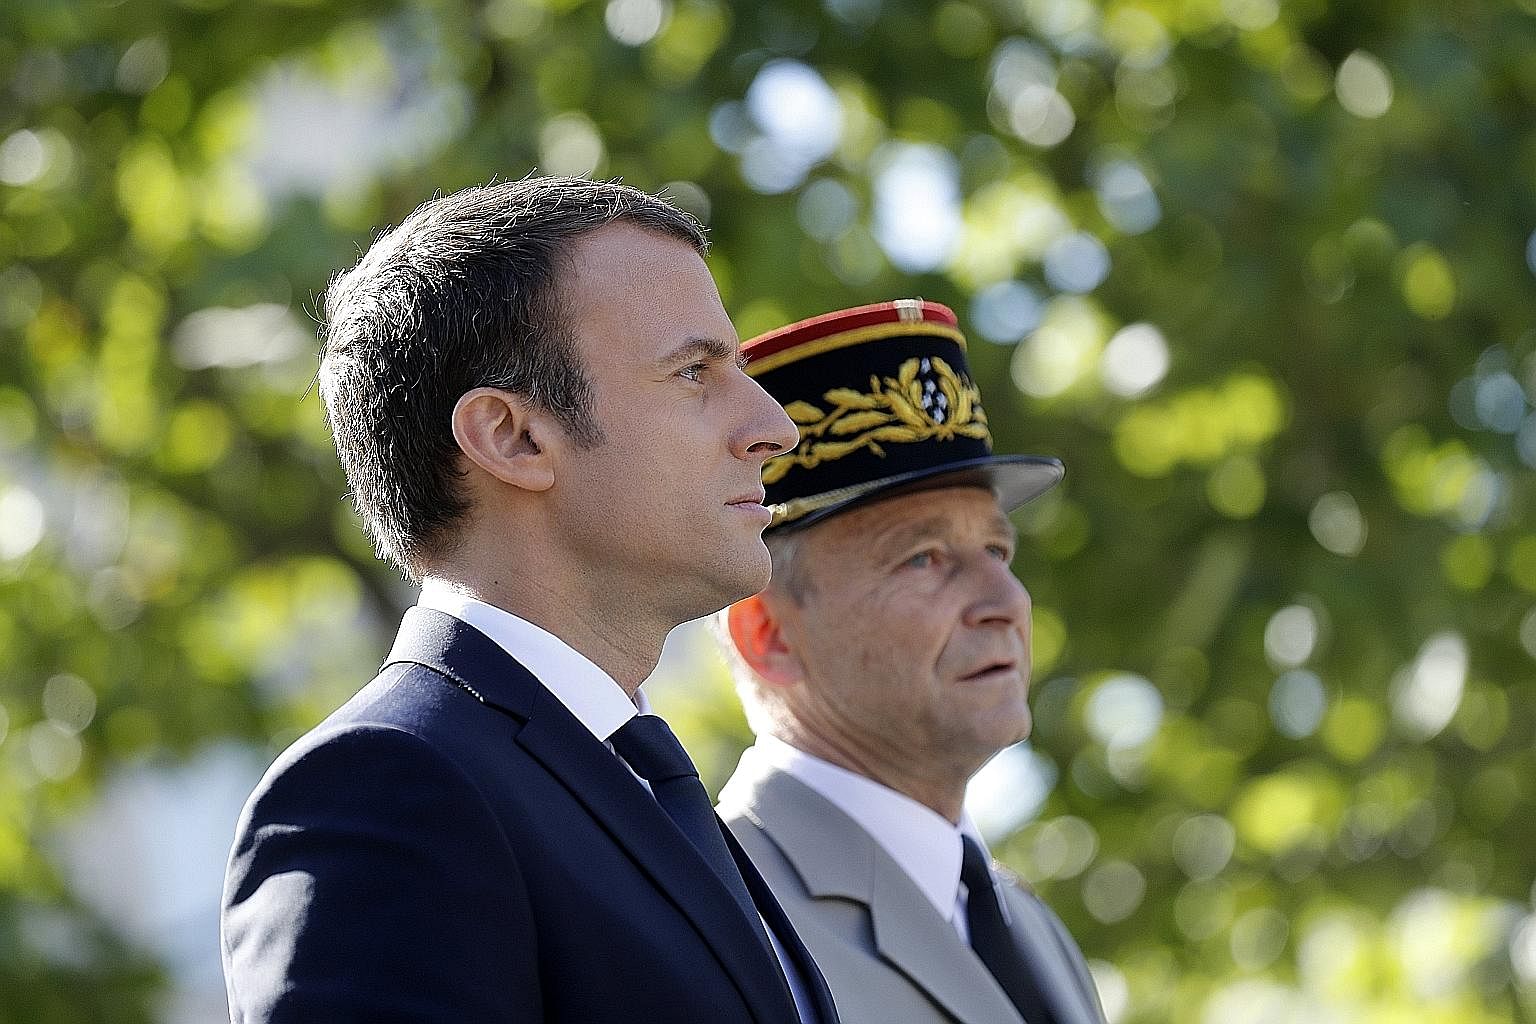 Mr Emmanuel Macron and General Pierre de Villiers at last year's Bastille Day parade. Gen de Villiers' resignation this week is a first by a head of the French military since 1958, and represents one of the biggest challenges to Mr Macron's authority